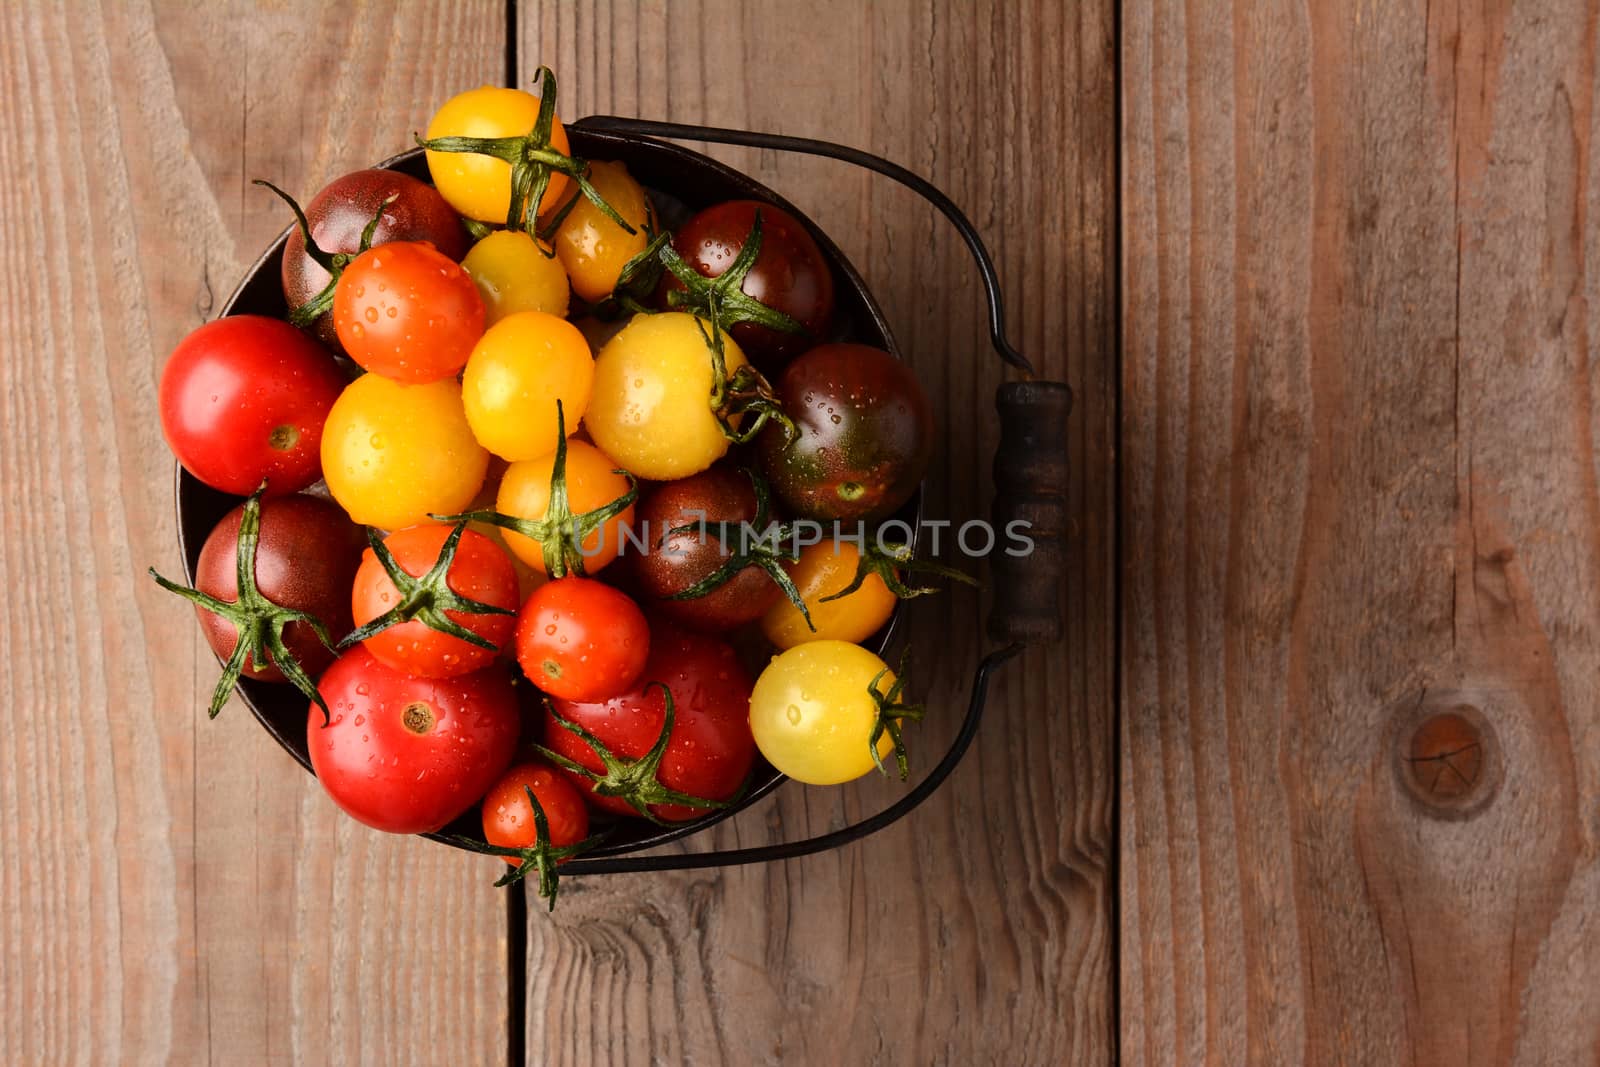 Baby Heirloom Tomatoes in a bucket on a rustic wooden table top. Horizontal format, looking down on the pail.